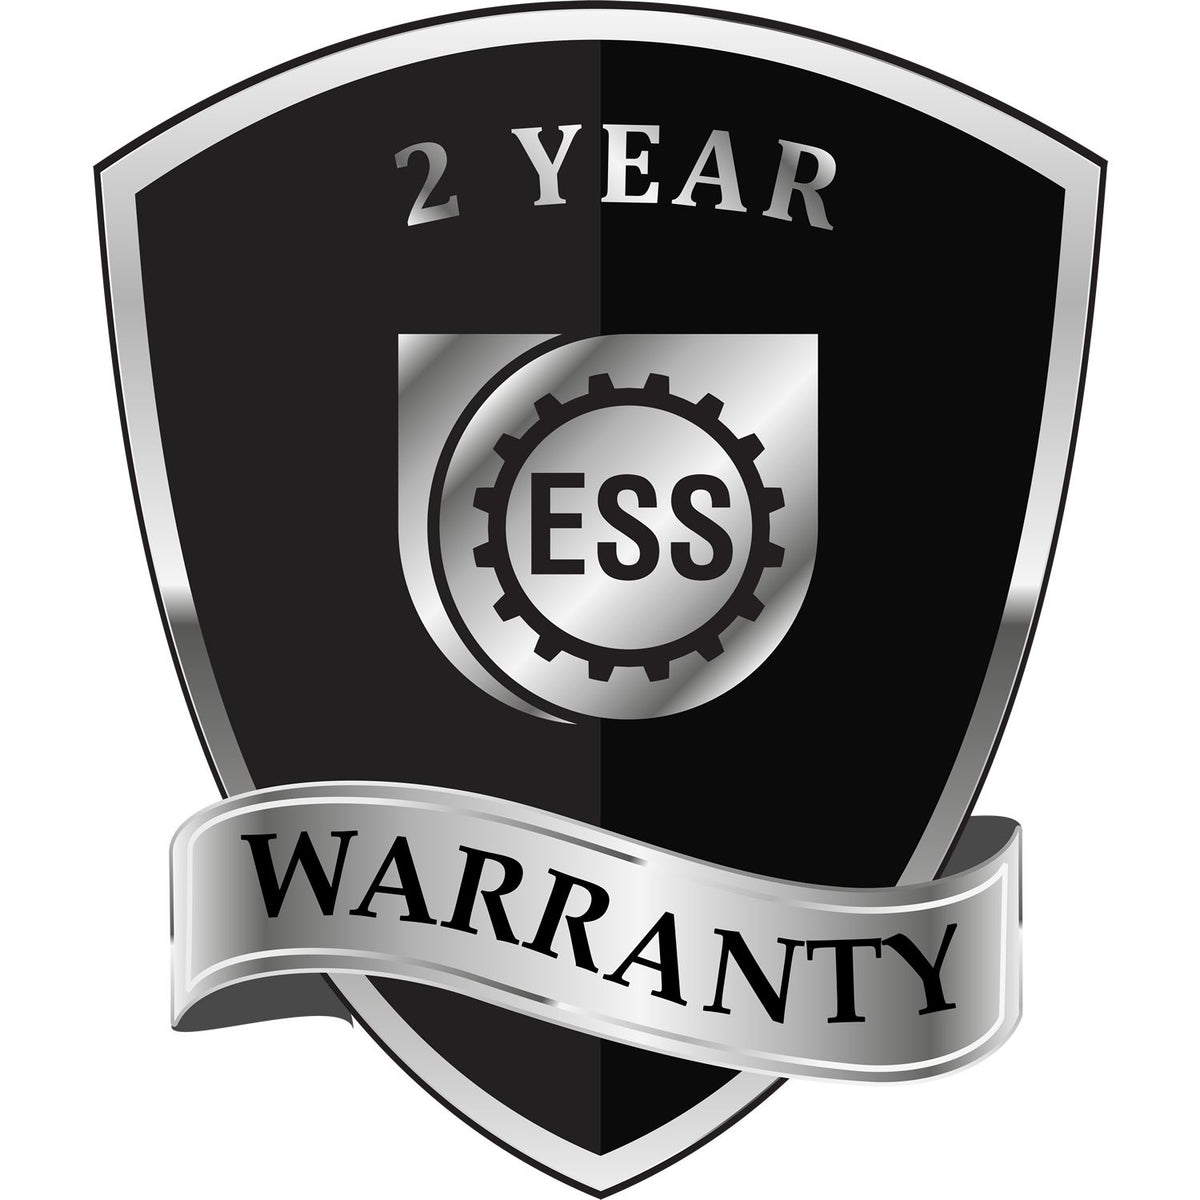 A black and silver badge or emblem showing warranty information for the Hybrid Connecticut Engineer Seal